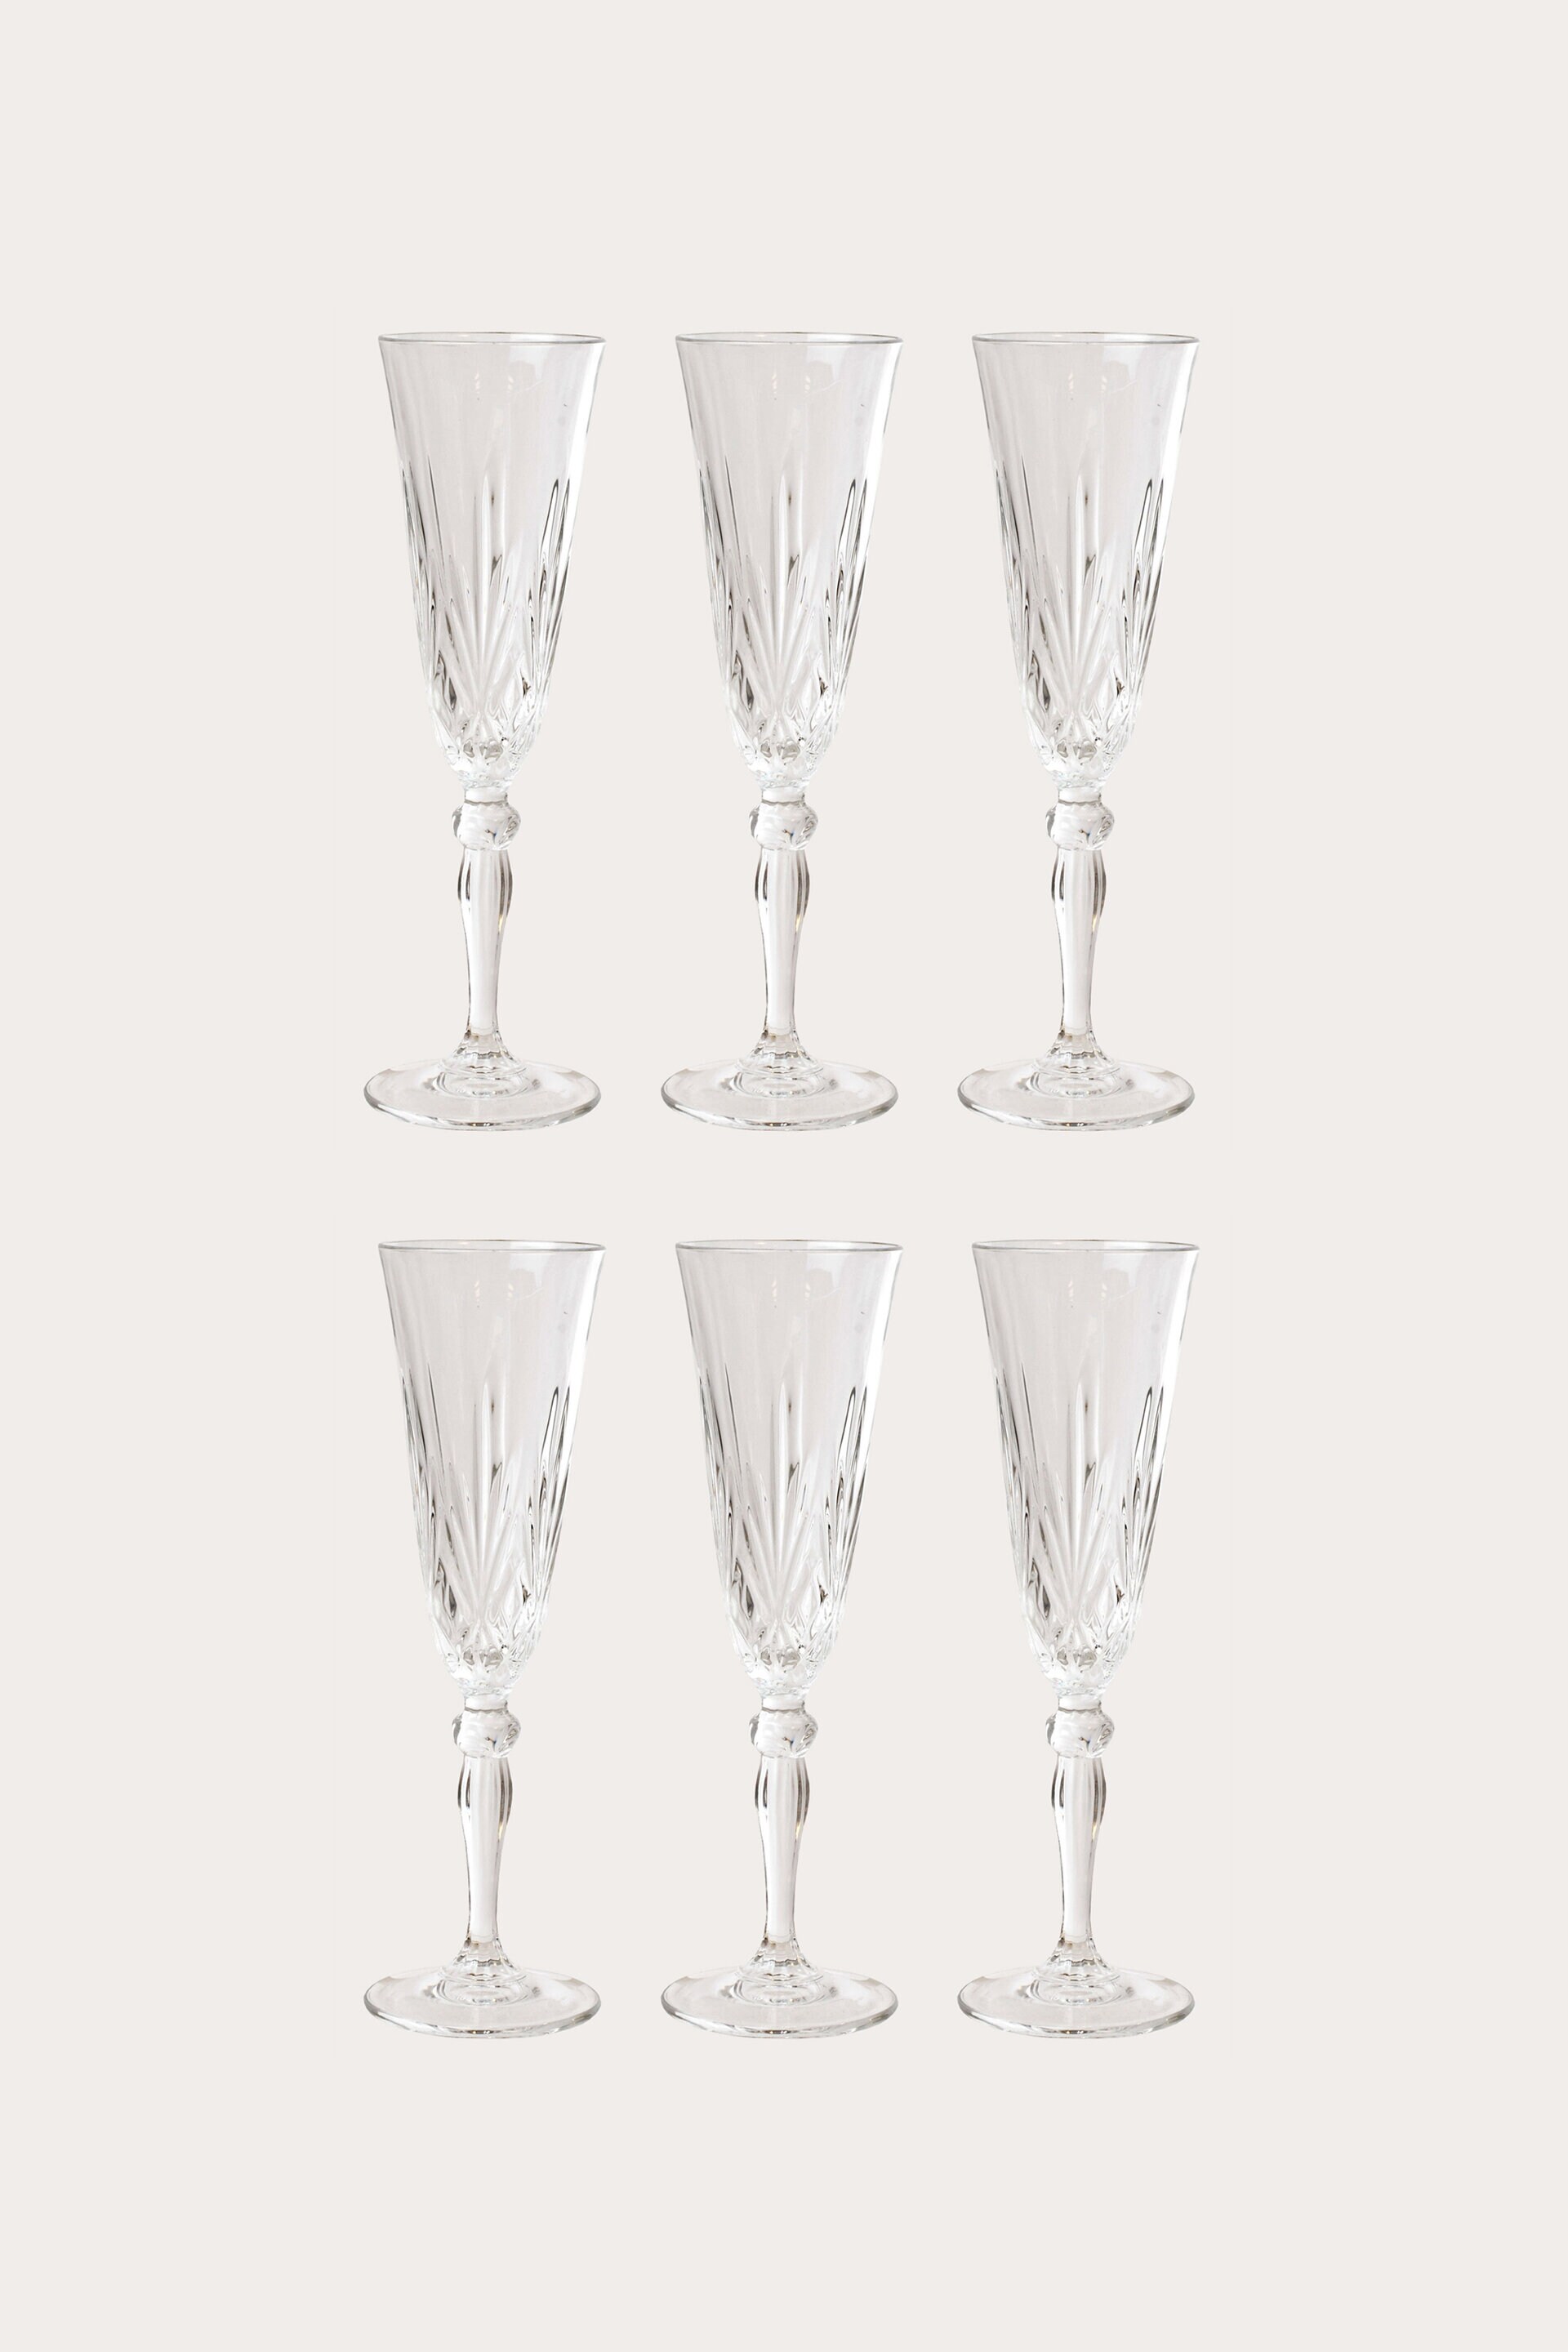 MELODIA champagne glass, 17 cl